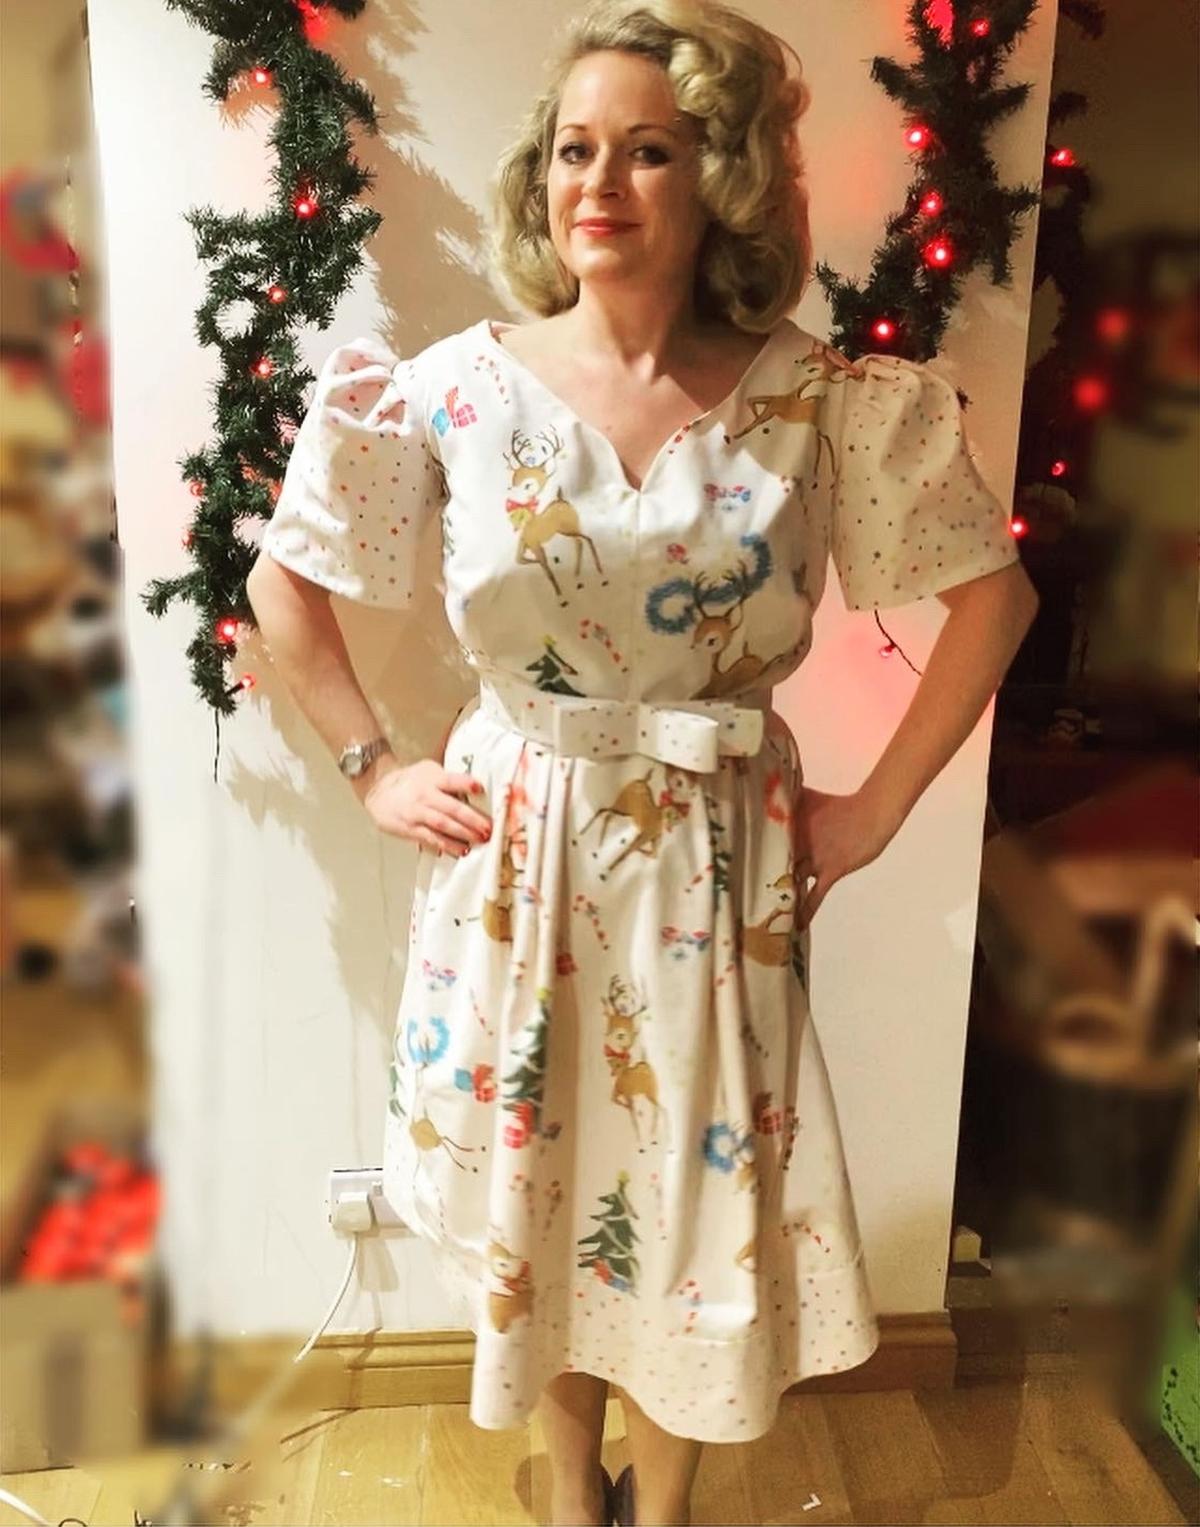 Rosie wearing a handmade dress made out of a charity shop duvet cover. (Kennedy News and Media)